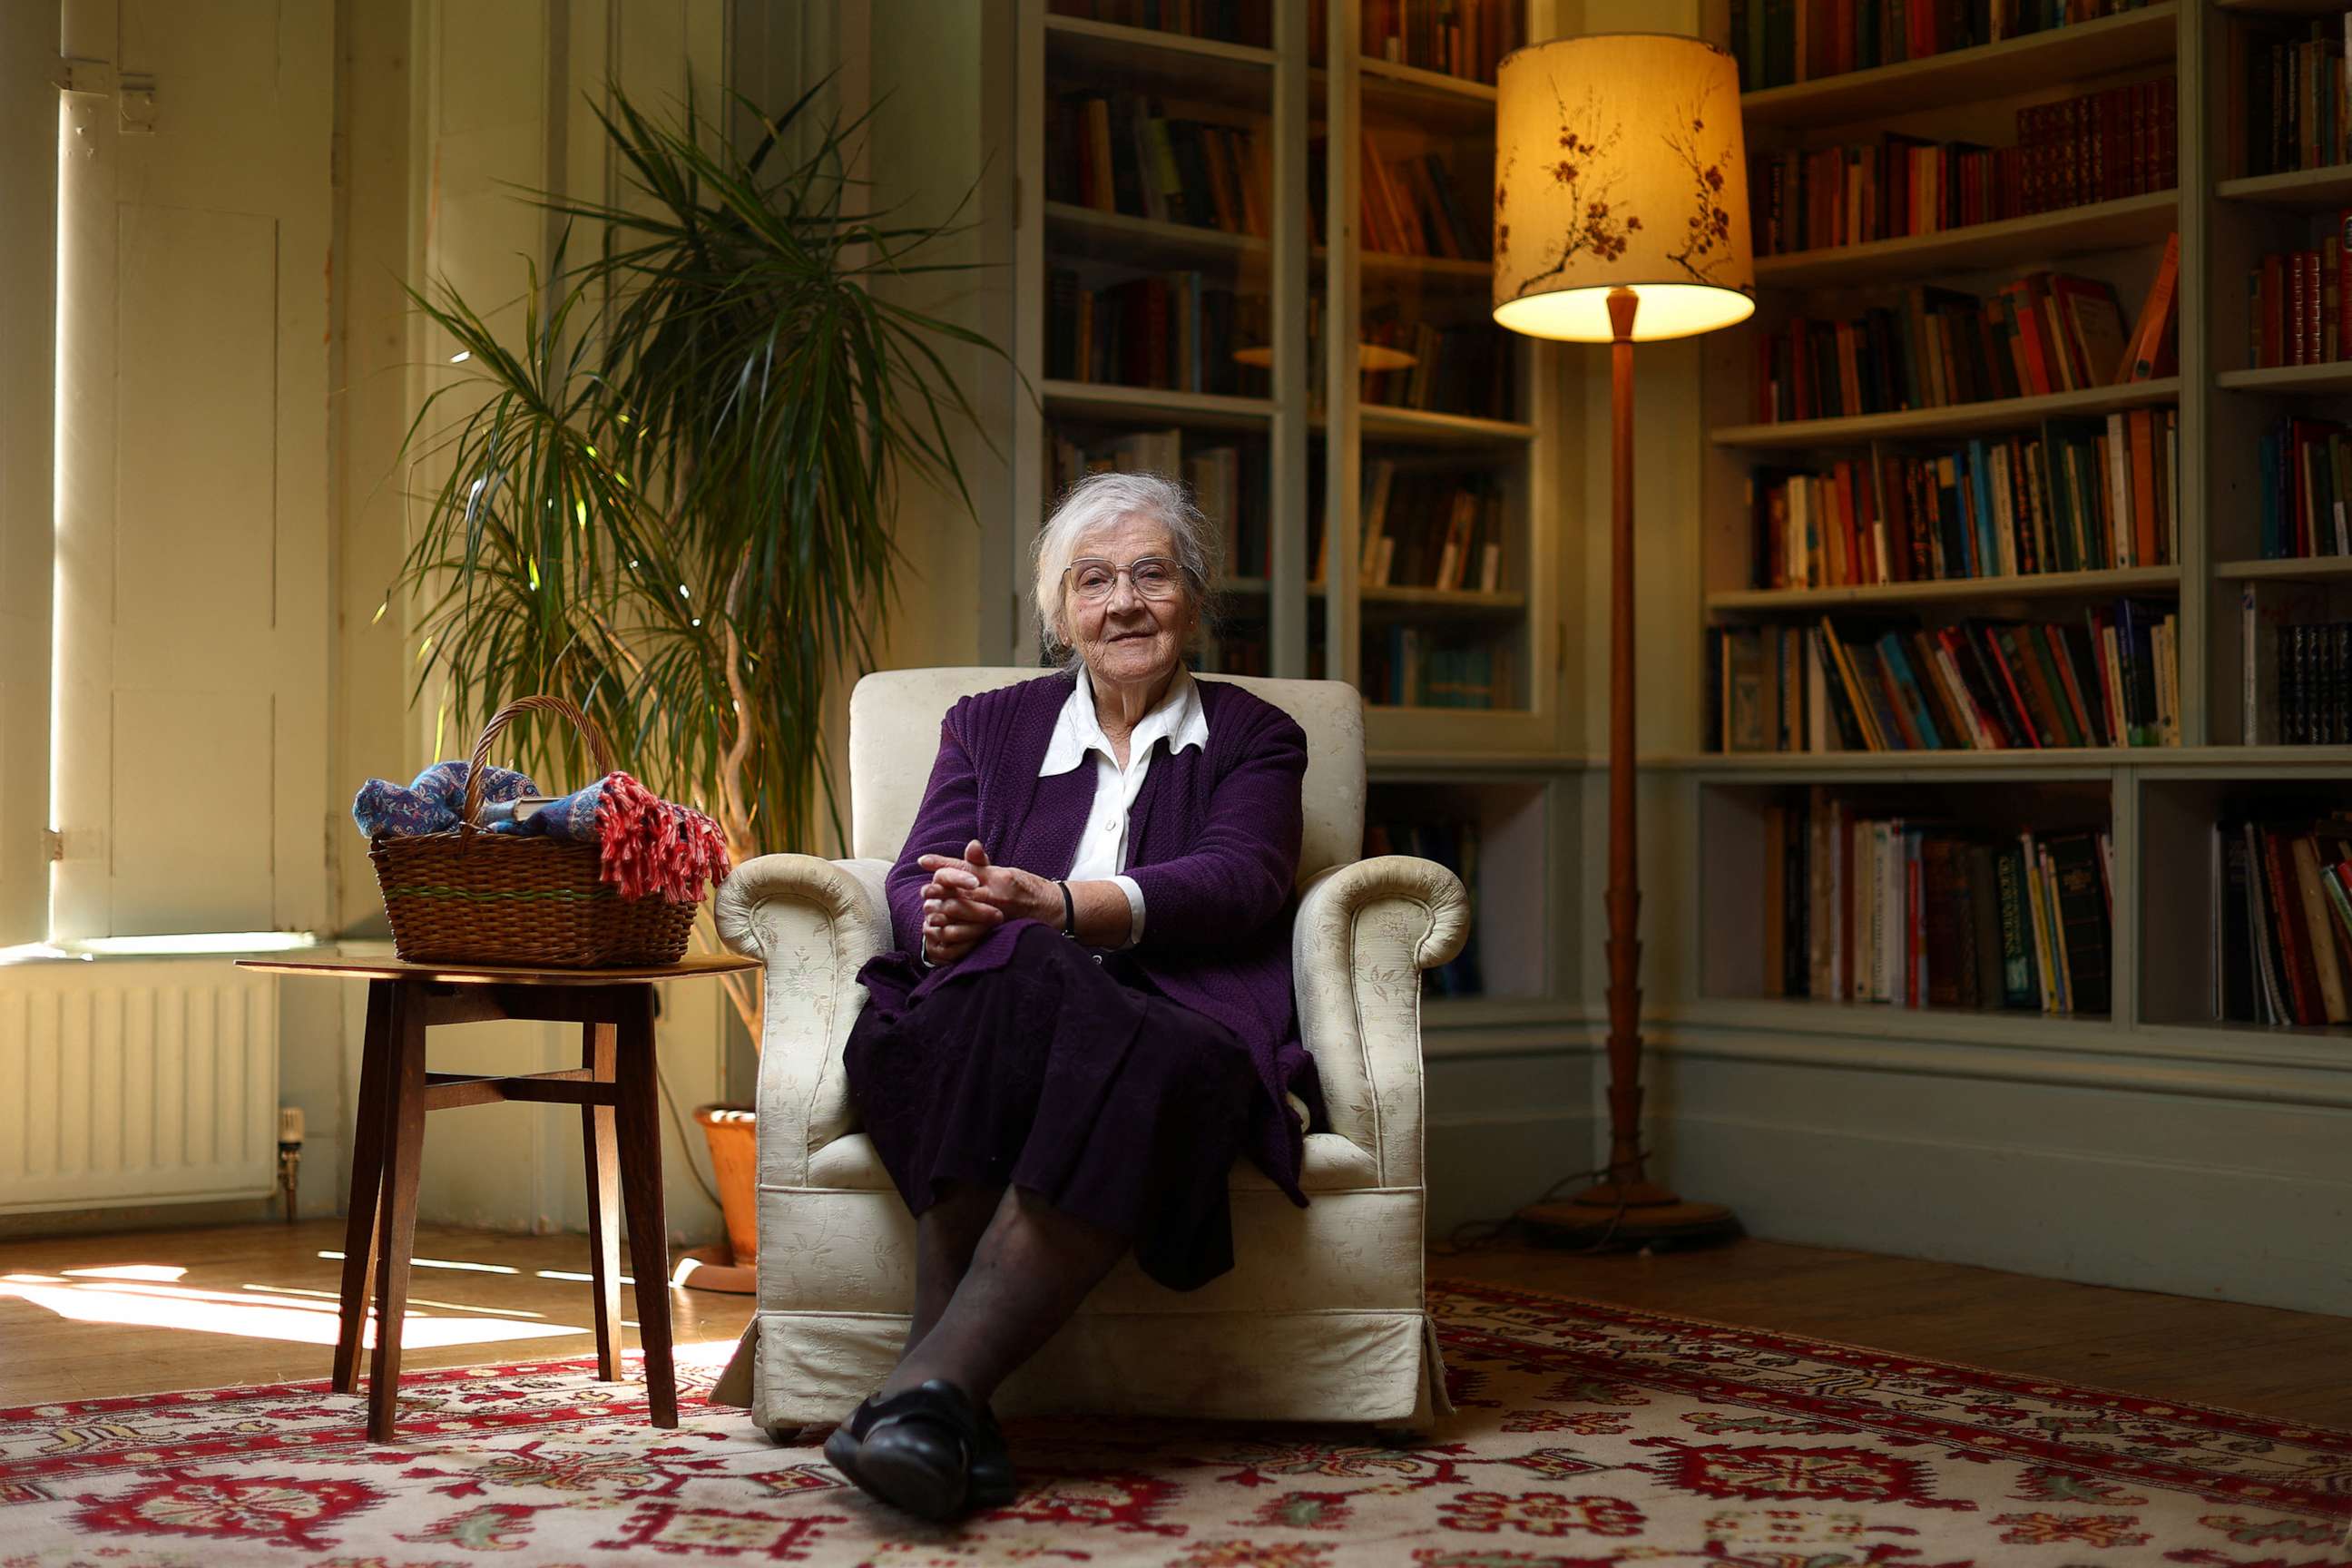 PHOTO: Pamela Tawse, 88, poses for a photograph in the library room of the Hawkwood Centre for Future Thinking in Stroud, Britain, April 20, 2023.